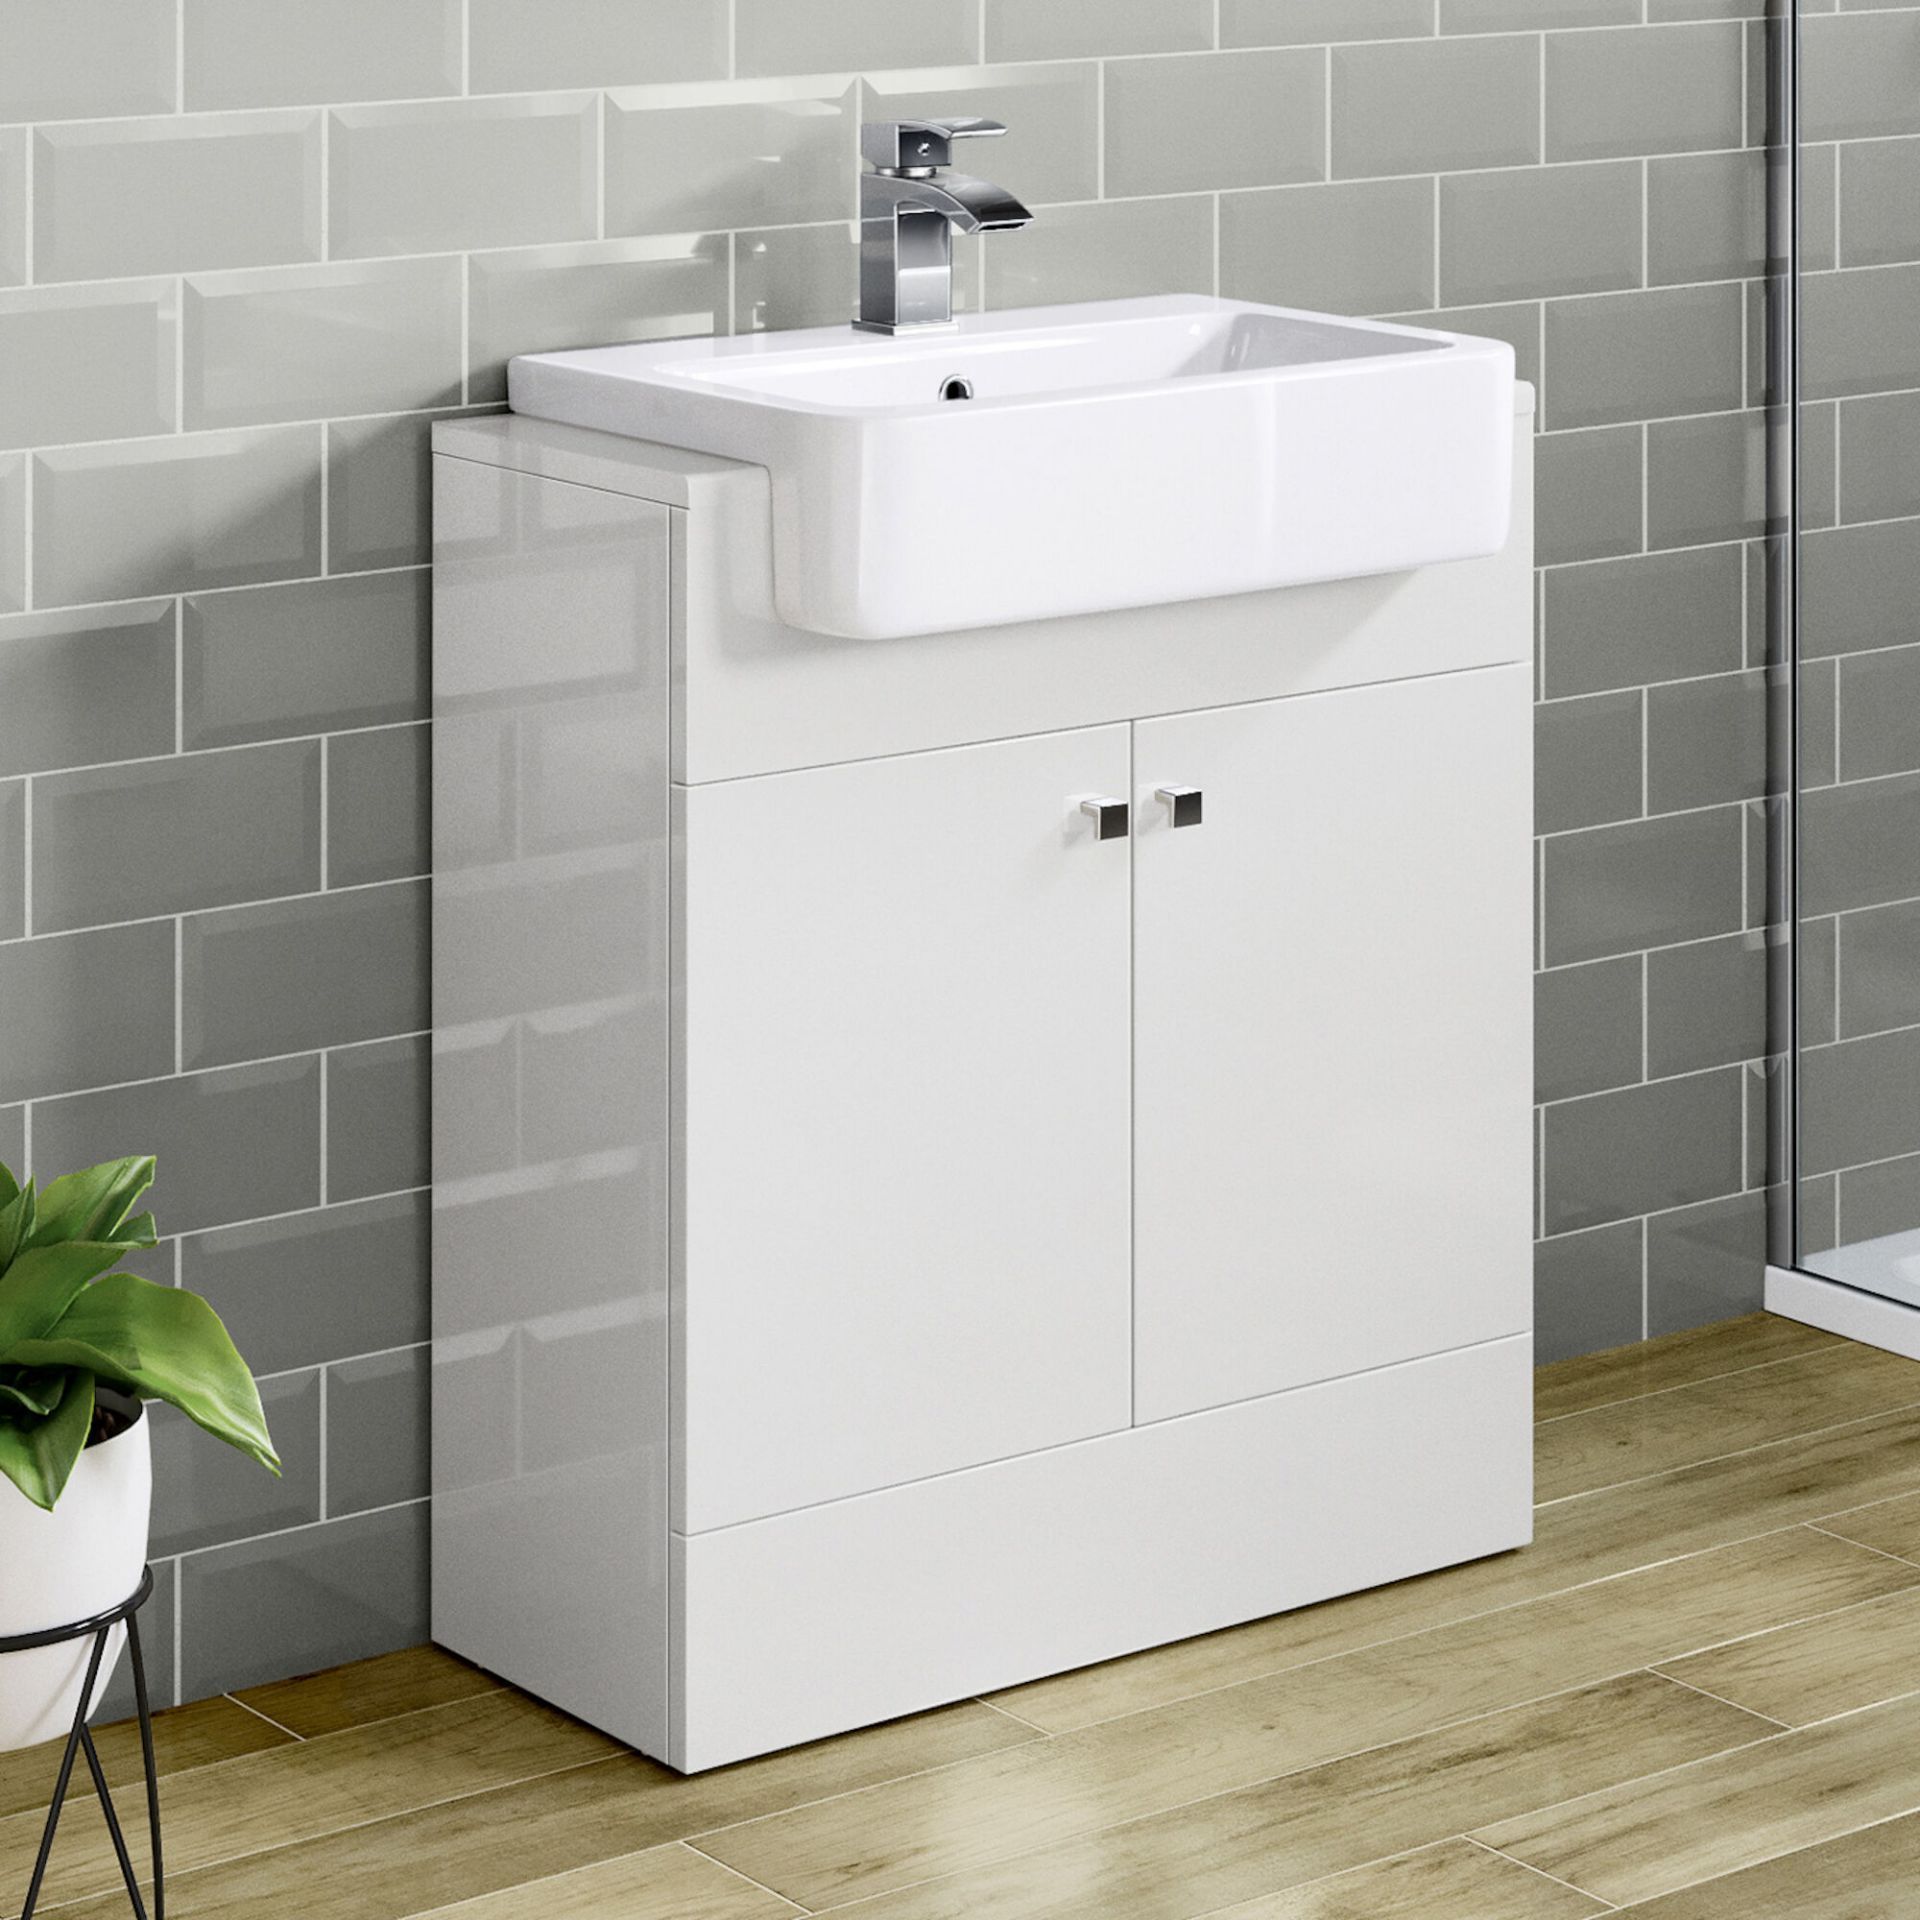 NEW & BOXED 660mm Harper Gloss White Sink Vanity Unit - Floor Standing. RRP £749.99.Comes comp...